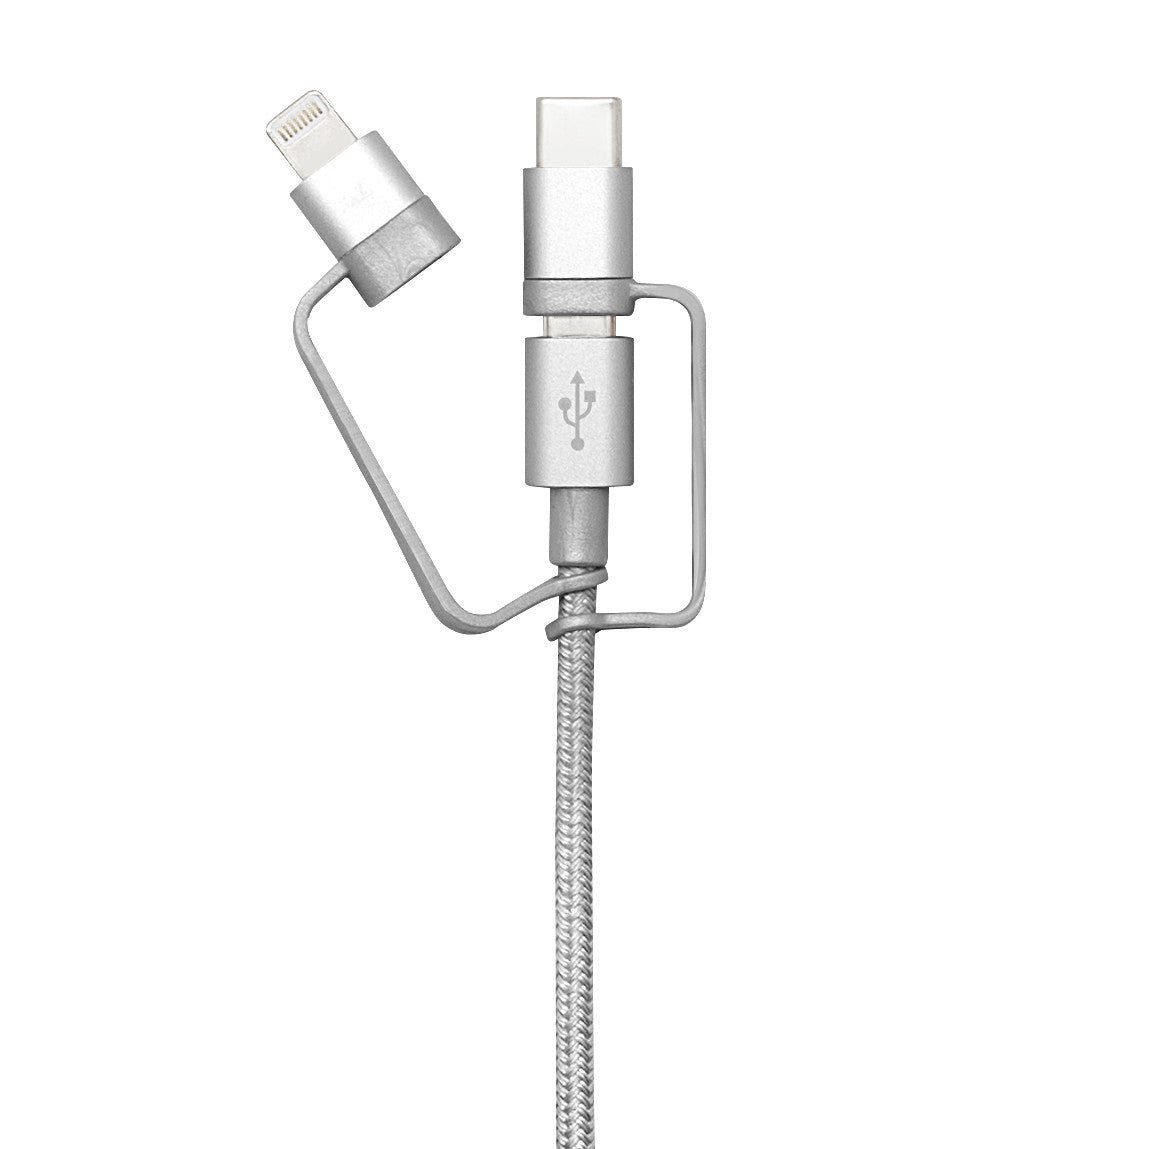 3-in-1 cable (Lightning, Type-C, Micro USB): Silver 1M